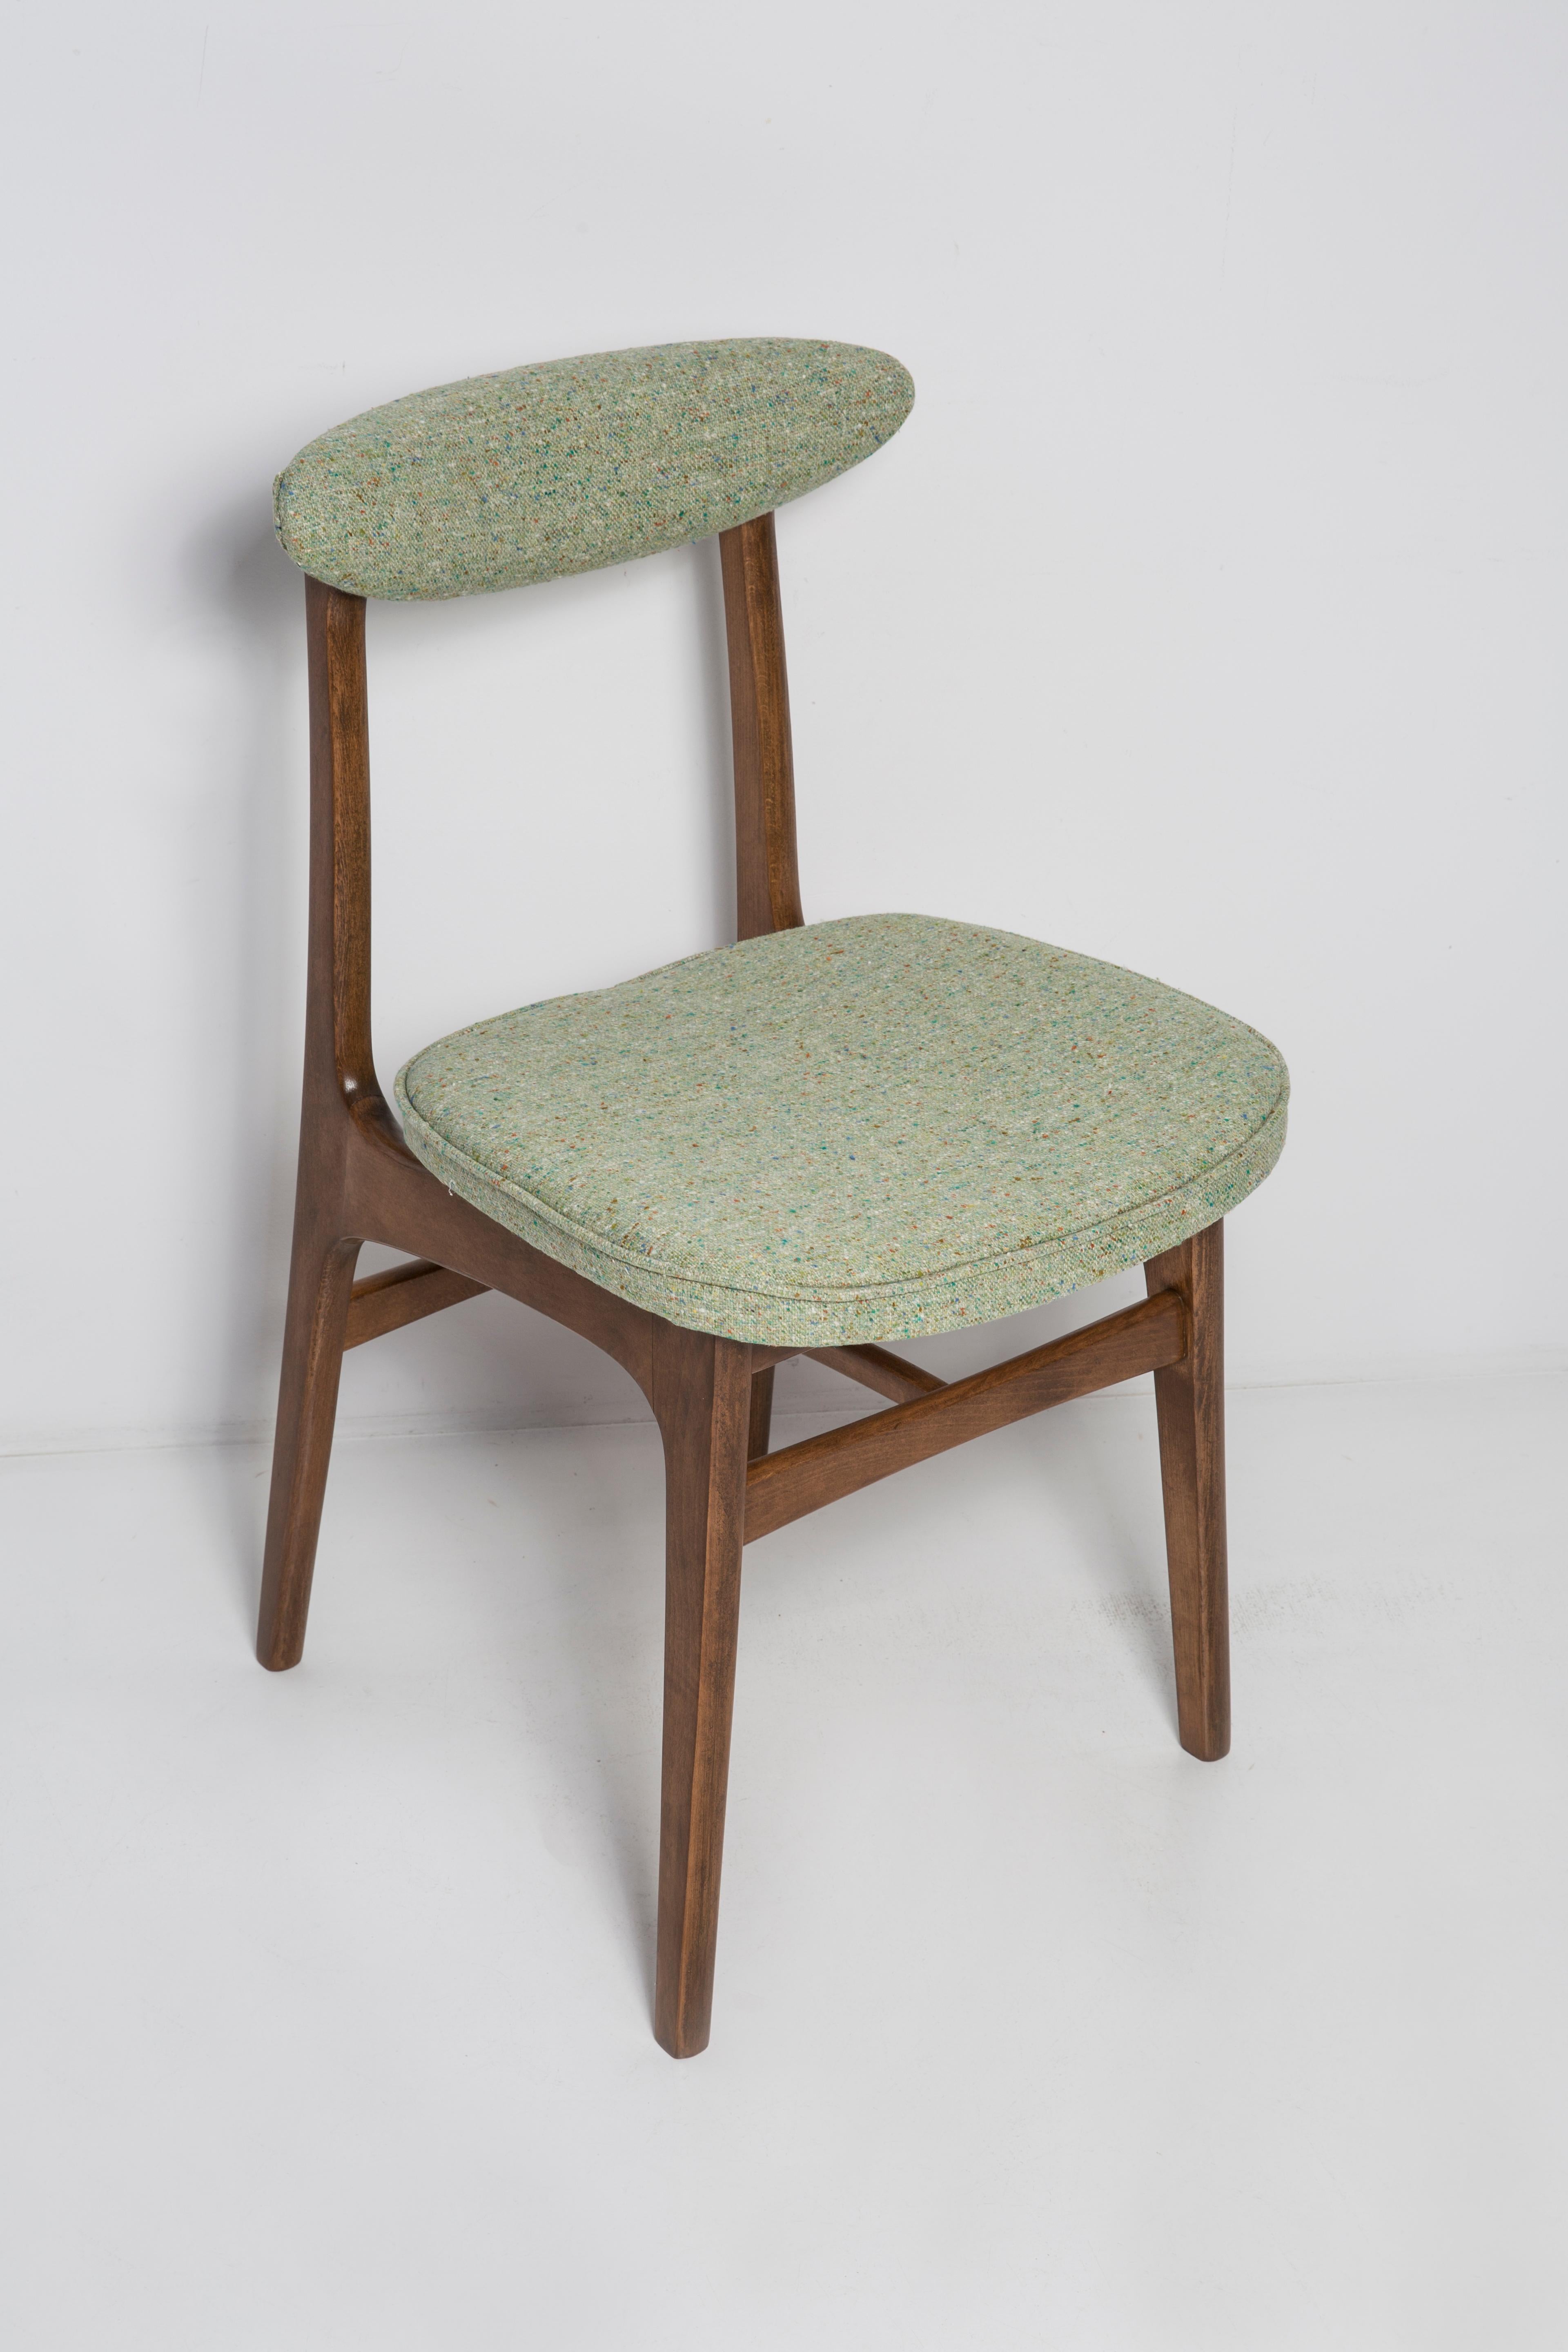 Chair designed by Prof. Rajmund Halas. Made of beechwood. Chair is after a complete upholstery renovation, the woodwork has been refreshed. Seat is dressed in apple green wool, durable and pleasant to the touch fabric. Chair is stable and very